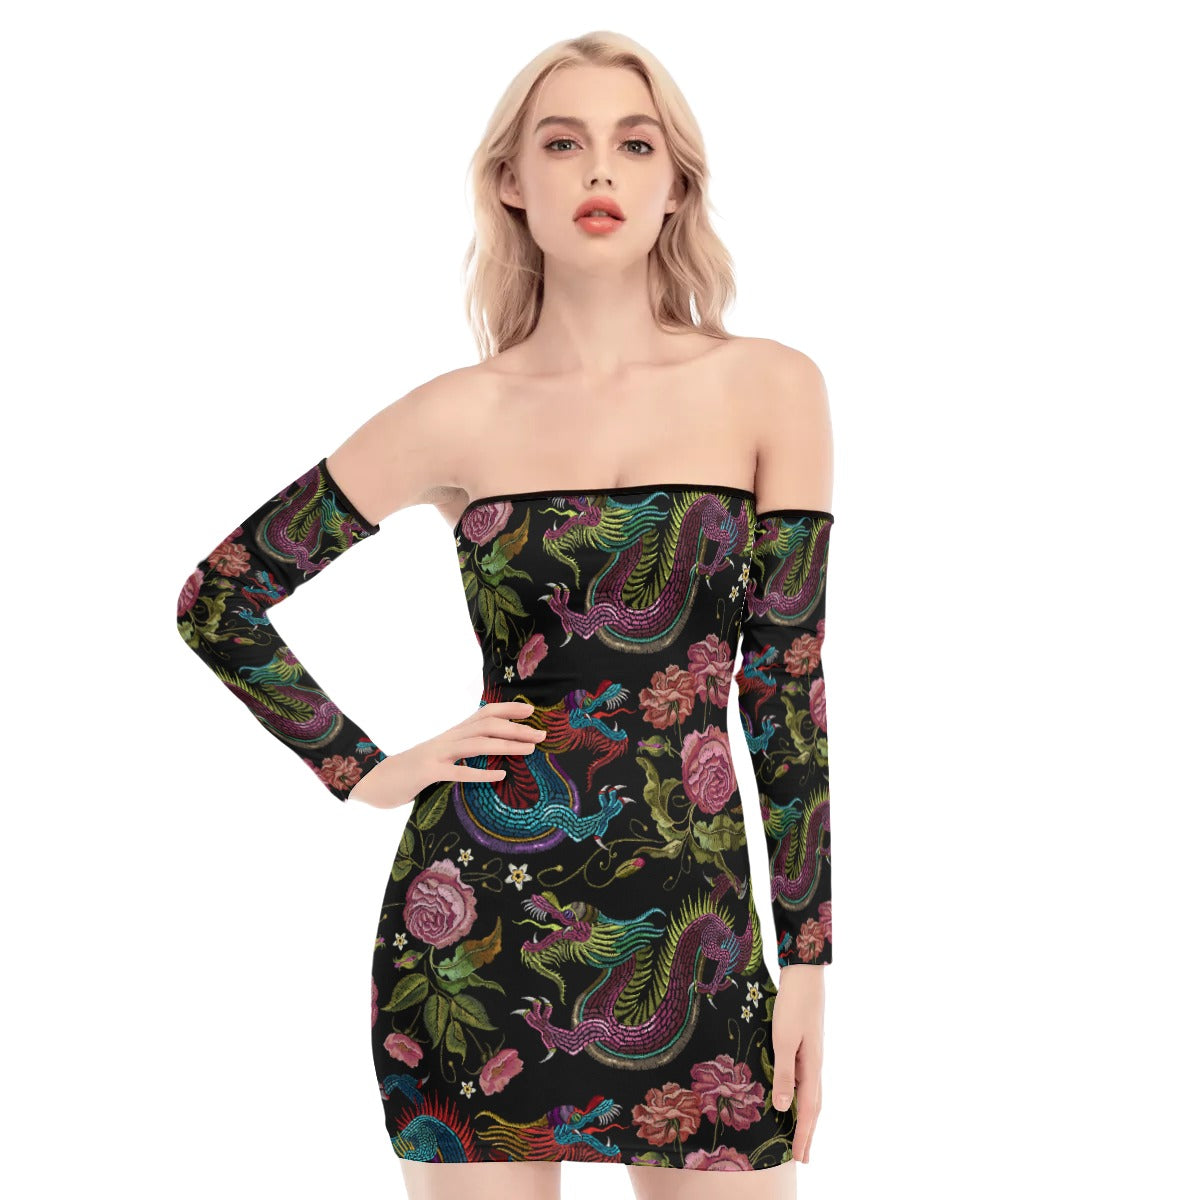 Dragons & Flowers Lace-up Dress